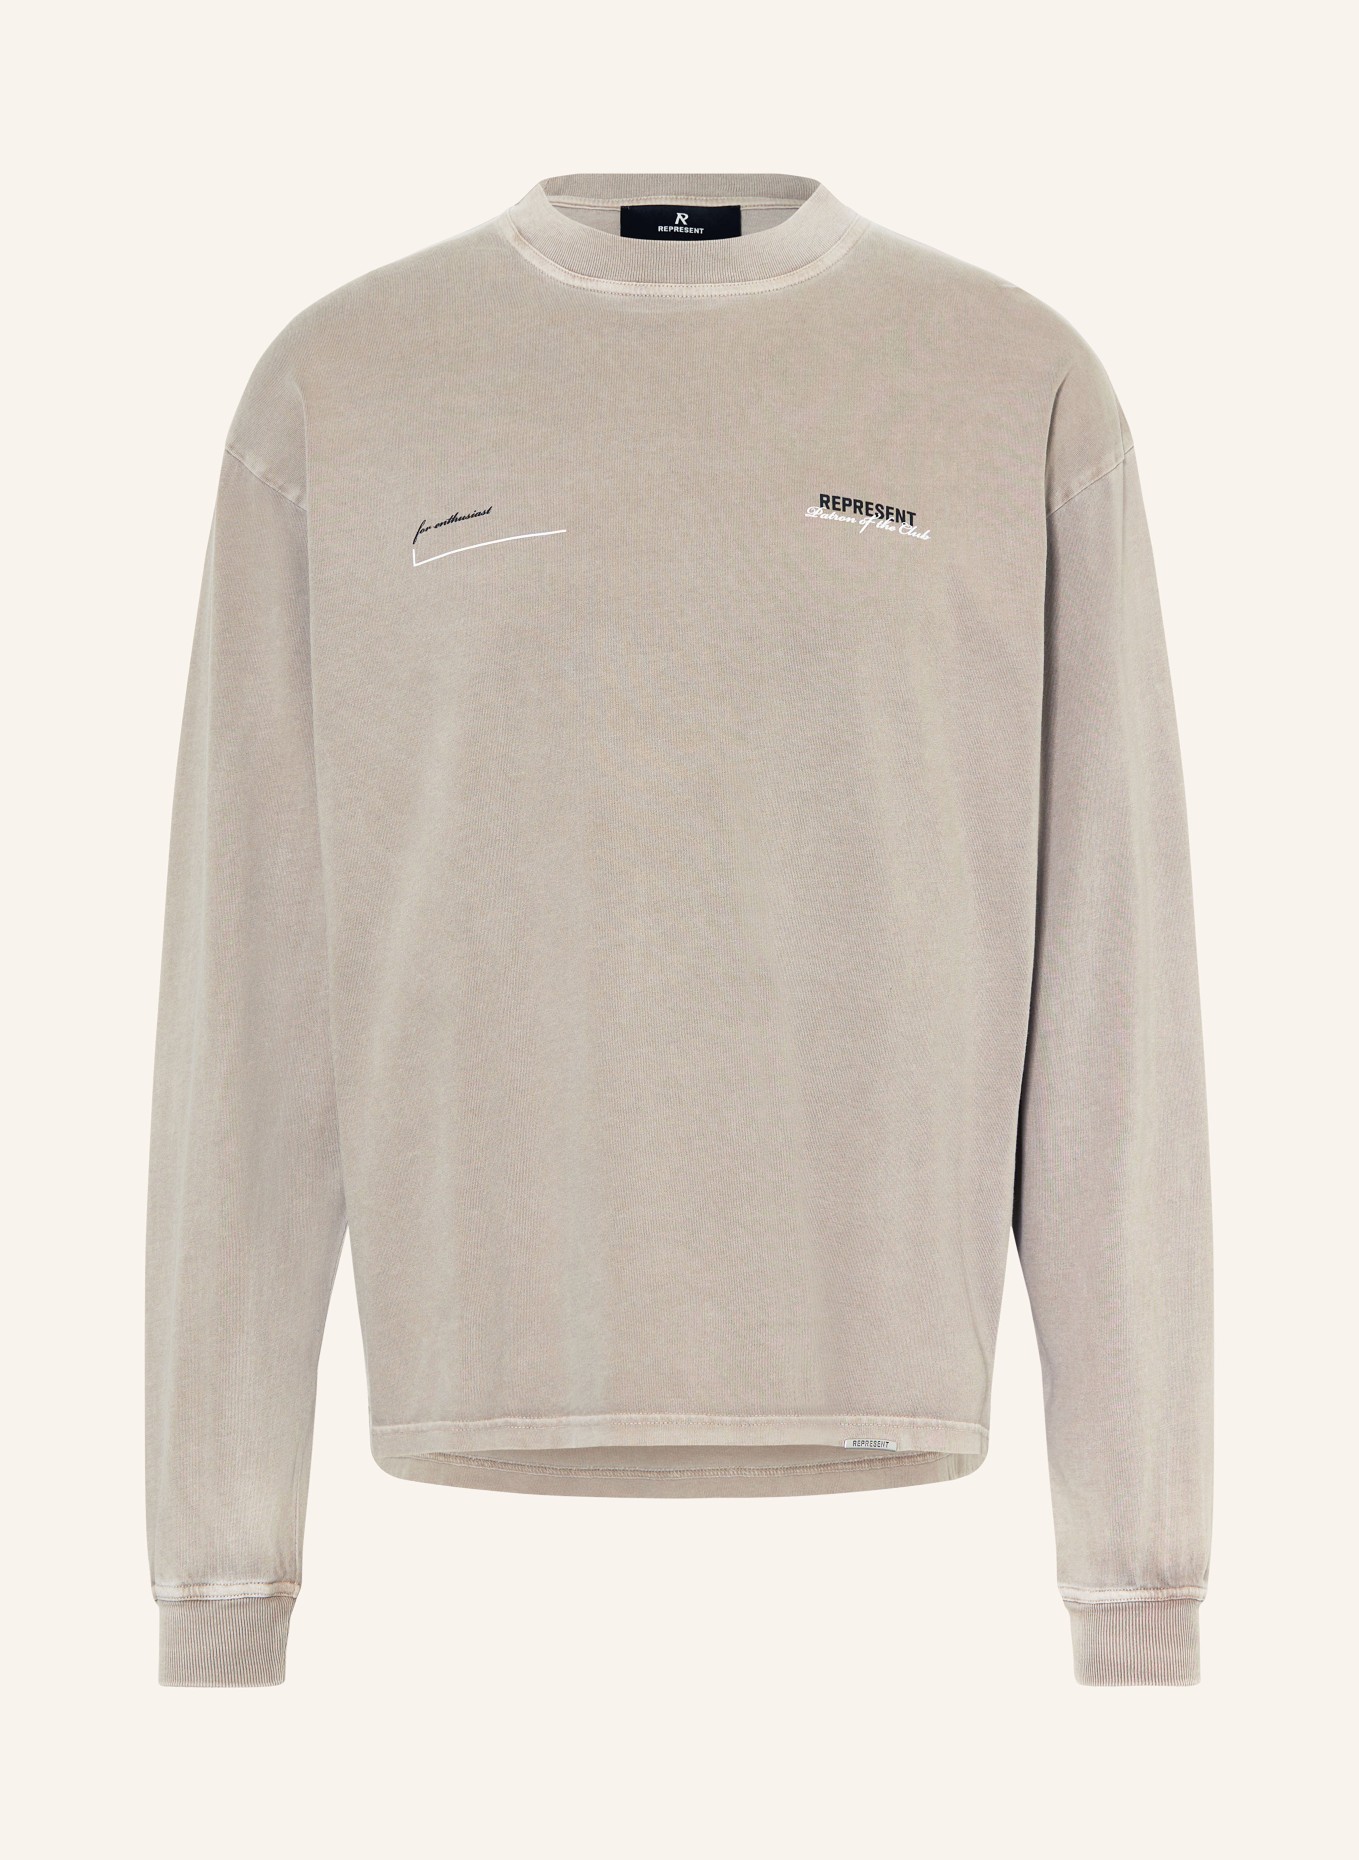 REPRESENT Longsleeve PATRON OF THE CLUB, Farbe: TAUPE (Bild 1)